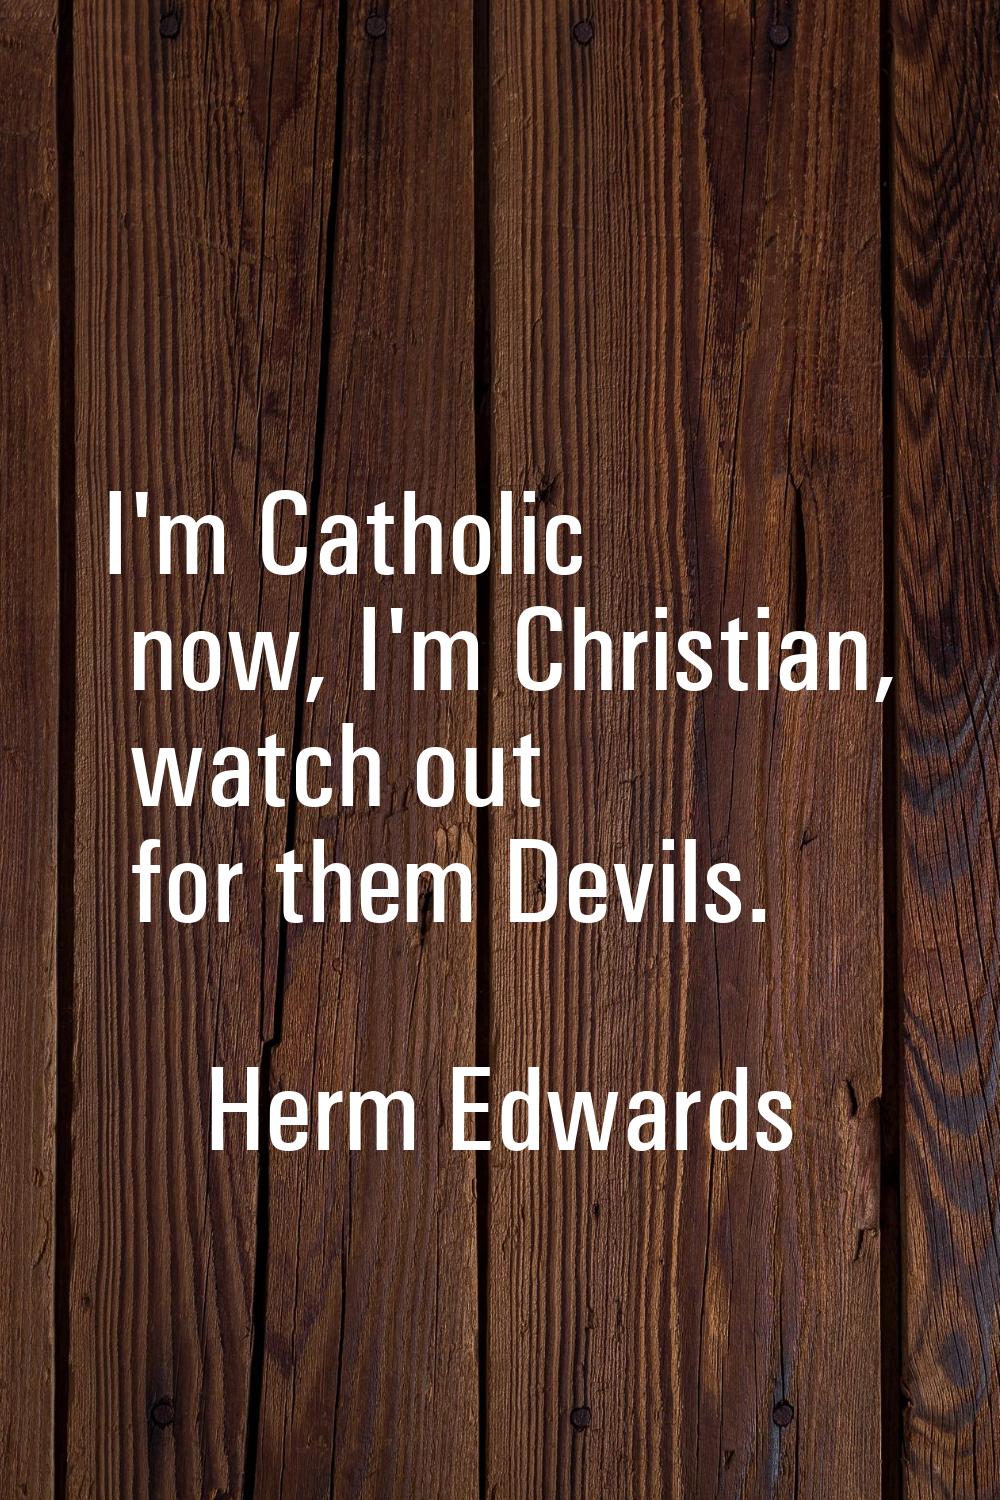 I'm Catholic now, I'm Christian, watch out for them Devils.